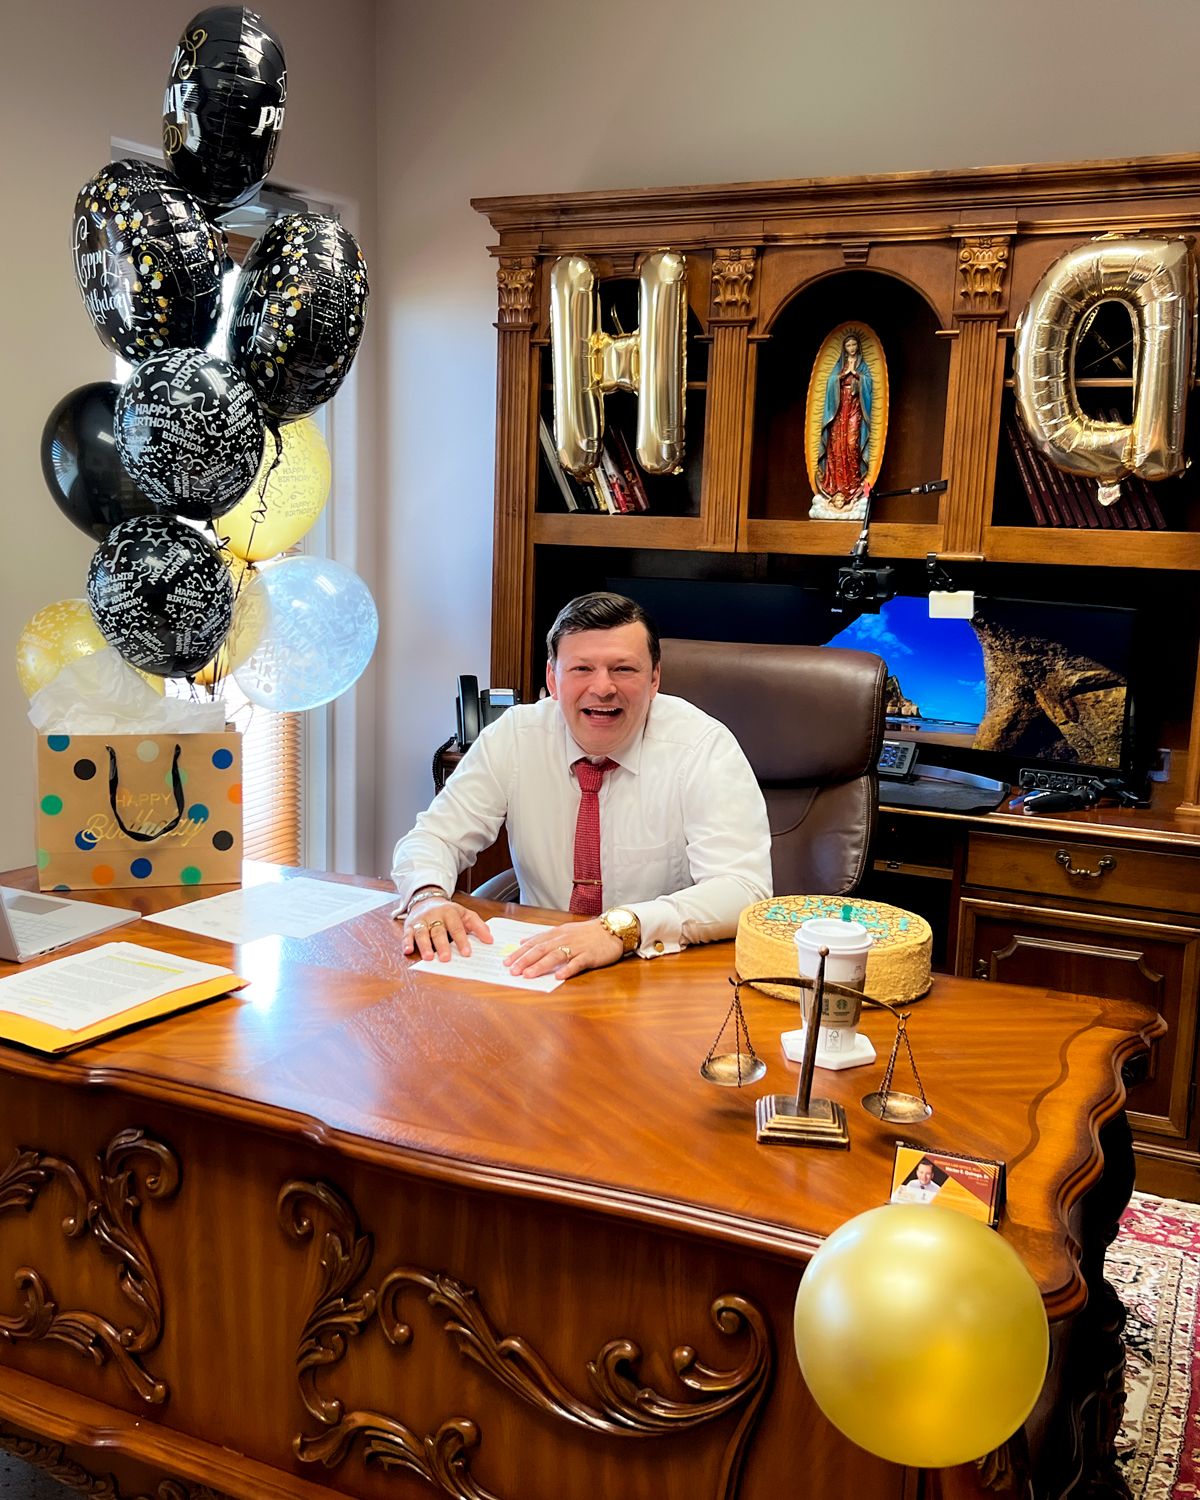 A person sitting at a desk with balloons Description automatically generated